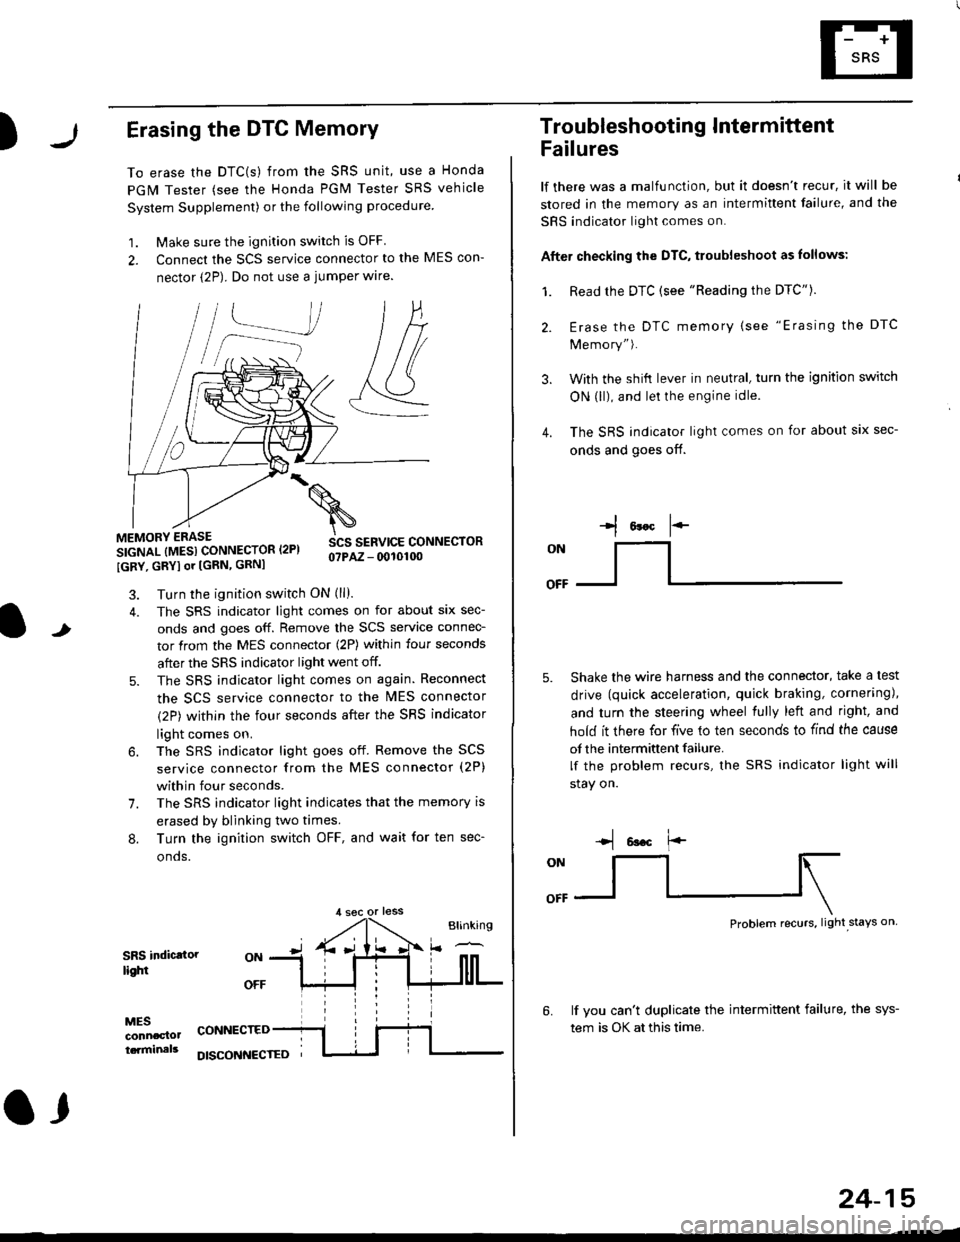 HONDA CIVIC 1998 6.G Workshop Manual )Erasing the DTC Memory
To erase the DTC(s) from the SRS unit, use a Honda
PGM Tester (see the Honda PGM Tester SRS vehicle
System Supplement) or the following procedure
1. Make sure the ignition swit